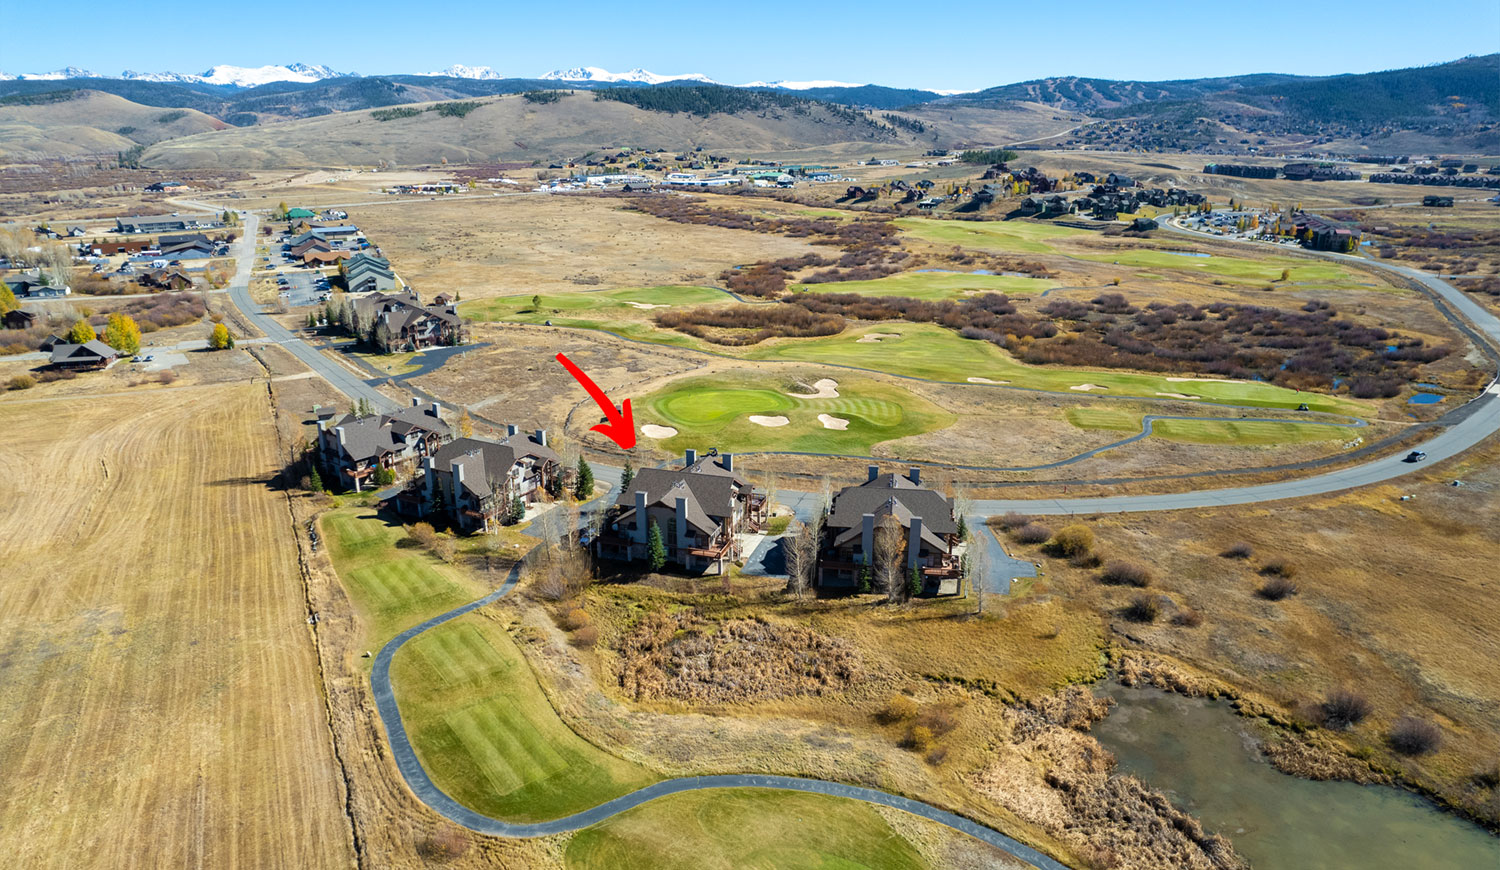 Townhome for sale at Grand Elk in Granby, CO